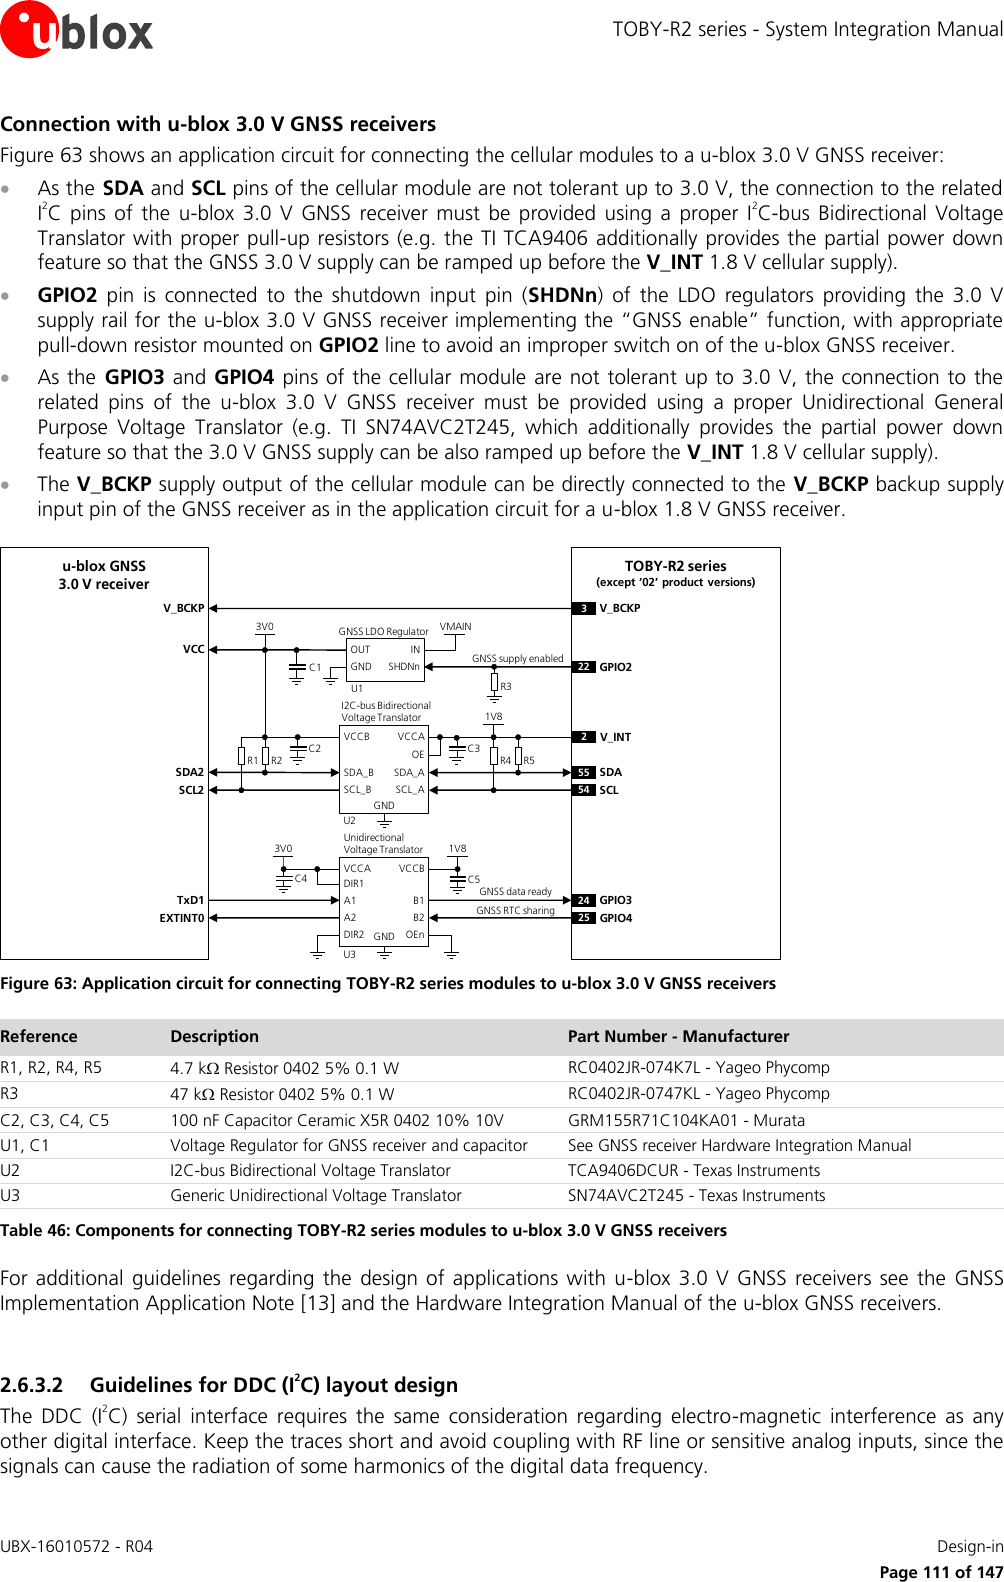 TOBY-R2 series - System Integration Manual UBX-16010572 - R04    Design-in     Page 111 of 147 Connection with u-blox 3.0 V GNSS receivers Figure 63 shows an application circuit for connecting the cellular modules to a u-blox 3.0 V GNSS receiver:  As the SDA and SCL pins of the cellular module are not tolerant up to 3.0 V, the connection to the related I2C pins  of  the u-blox  3.0  V  GNSS  receiver  must  be  provided  using  a  proper  I2C-bus  Bidirectional  Voltage Translator with proper pull-up resistors (e.g. the TI TCA9406 additionally provides the partial power down feature so that the GNSS 3.0 V supply can be ramped up before the V_INT 1.8 V cellular supply).  GPIO2  pin  is  connected  to  the  shutdown  input  pin  (SHDNn)  of  the  LDO  regulators  providing  the  3.0  V supply rail for the u-blox 3.0 V GNSS receiver implementing the “GNSS enable” function, with appropriate pull-down resistor mounted on GPIO2 line to avoid an improper switch on of the u-blox GNSS receiver.  As the  GPIO3 and GPIO4 pins of the cellular module are not tolerant up to 3.0  V, the connection to the related  pins  of  the  u-blox  3.0  V  GNSS  receiver  must  be  provided  using  a  proper  Unidirectional  General Purpose  Voltage  Translator  (e.g.  TI  SN74AVC2T245,  which  additionally  provides  the  partial  power  down feature so that the 3.0 V GNSS supply can be also ramped up before the V_INT 1.8 V cellular supply).  The V_BCKP supply output of the cellular module can be directly connected to the V_BCKP backup supply input pin of the GNSS receiver as in the application circuit for a u-blox 1.8 V GNSS receiver. u-blox GNSS 3.0 V receiver24 GPIO31V8B1 A1GNDU3B2A2VCCBVCCAUnidirectionalVoltage TranslatorC4 C53V0TxD1R1INOUTGNSS LDO RegulatorSHDNnR2VMAIN3V0U122 GPIO255 SDA54 SCLR4 R51V8SDA_A SDA_BGNDU2SCL_ASCL_BVCCAVCCBI2C-bus Bidirectional Voltage Translator2V_INTC1C2 C3R3SDA2SCL2VCCDIR1DIR23V_BCKPV_BCKPOEnOEGNSS data readyGNSS supply enabledGNDTOBY-R2 series(except ‘02’ product versions)EXTINT0 GPIO425GNSS RTC sharing Figure 63: Application circuit for connecting TOBY-R2 series modules to u-blox 3.0 V GNSS receivers Reference Description Part Number - Manufacturer R1, R2, R4, R5 4.7 k Resistor 0402 5% 0.1 W  RC0402JR-074K7L - Yageo Phycomp R3 47 k Resistor 0402 5% 0.1 W  RC0402JR-0747KL - Yageo Phycomp C2, C3, C4, C5 100 nF Capacitor Ceramic X5R 0402 10% 10V GRM155R71C104KA01 - Murata U1, C1 Voltage Regulator for GNSS receiver and capacitor  See GNSS receiver Hardware Integration Manual U2 I2C-bus Bidirectional Voltage Translator TCA9406DCUR - Texas Instruments U3 Generic Unidirectional Voltage Translator SN74AVC2T245 - Texas Instruments Table 46: Components for connecting TOBY-R2 series modules to u-blox 3.0 V GNSS receivers For additional  guidelines regarding the  design of applications  with  u-blox 3.0  V GNSS  receivers  see  the  GNSS Implementation Application Note [13] and the Hardware Integration Manual of the u-blox GNSS receivers.  2.6.3.2 Guidelines for DDC (I2C) layout design The  DDC  (I2C)  serial  interface  requires  the  same  consideration  regarding  electro-magnetic  interference  as  any other digital interface. Keep the traces short and avoid coupling with RF line or sensitive analog inputs, since the signals can cause the radiation of some harmonics of the digital data frequency. 